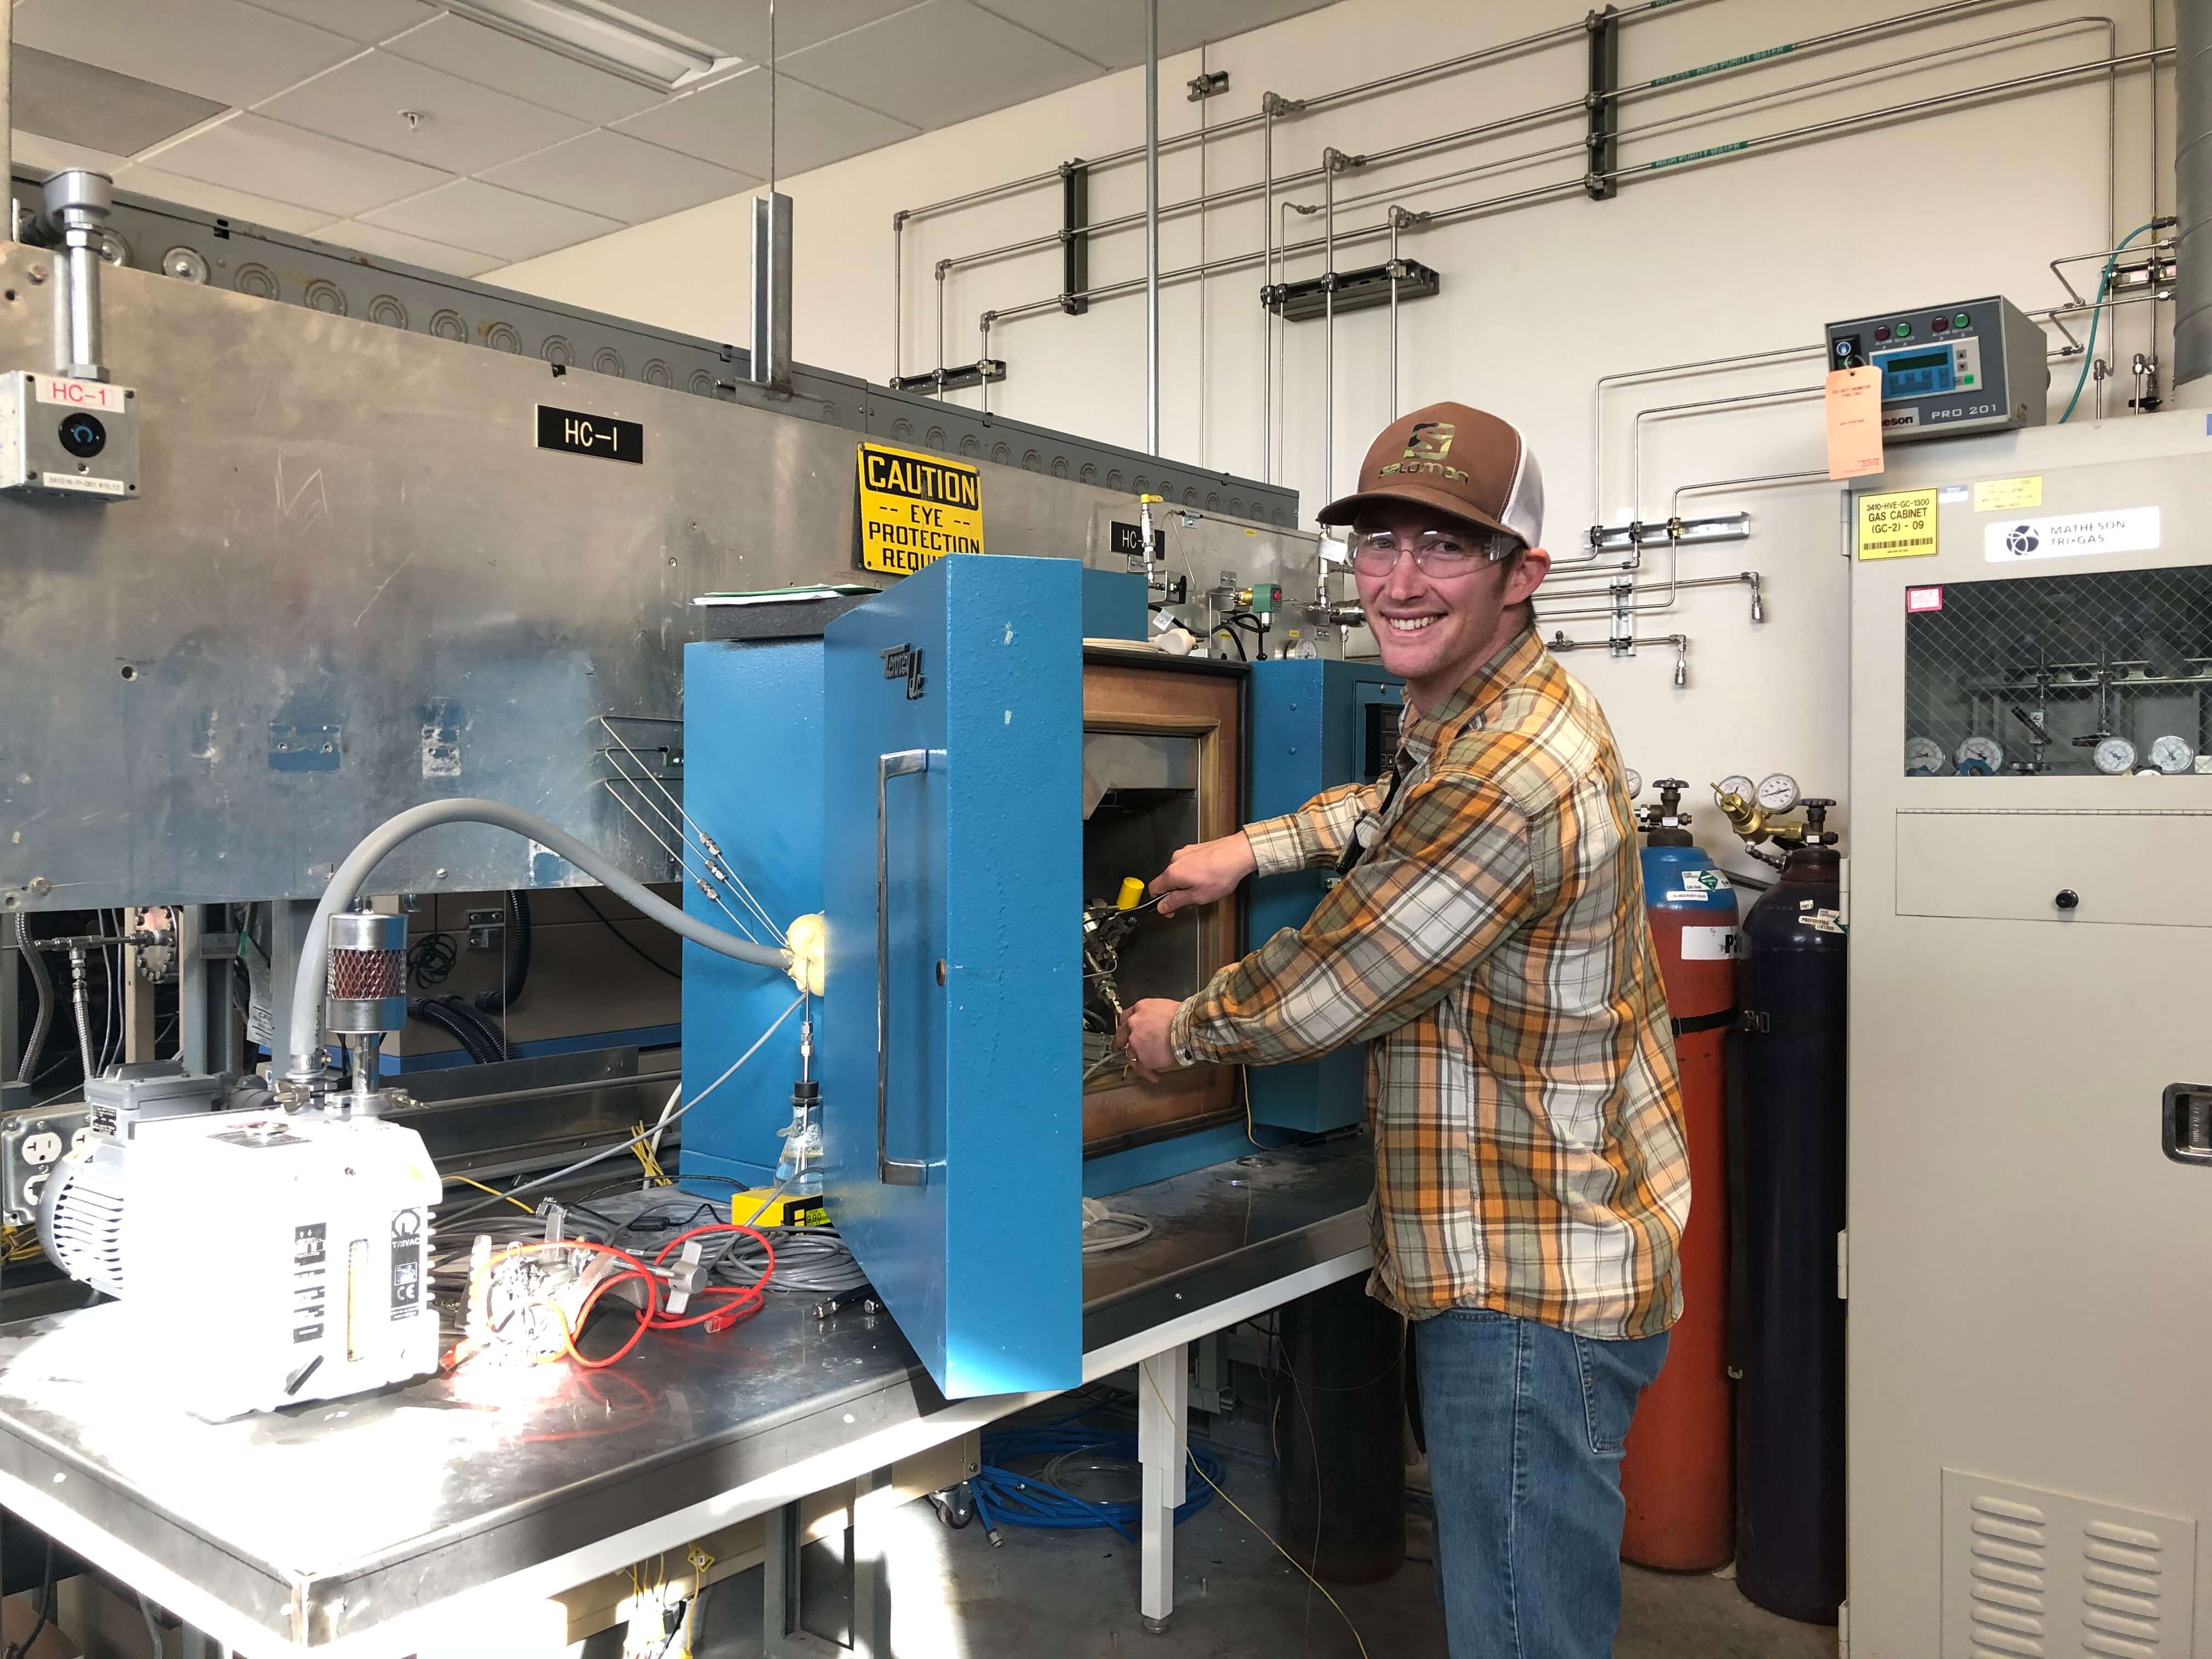 A smiling man uses a wrench to tighten something inside of a a large blue box. The boxes dore is open to allow access. Out of one side of the box, multiple tubes leave a sealed opening. One tube goes to a compressor, another goes to an erlenmeyer flask with a stopper, the rest go out of sight.